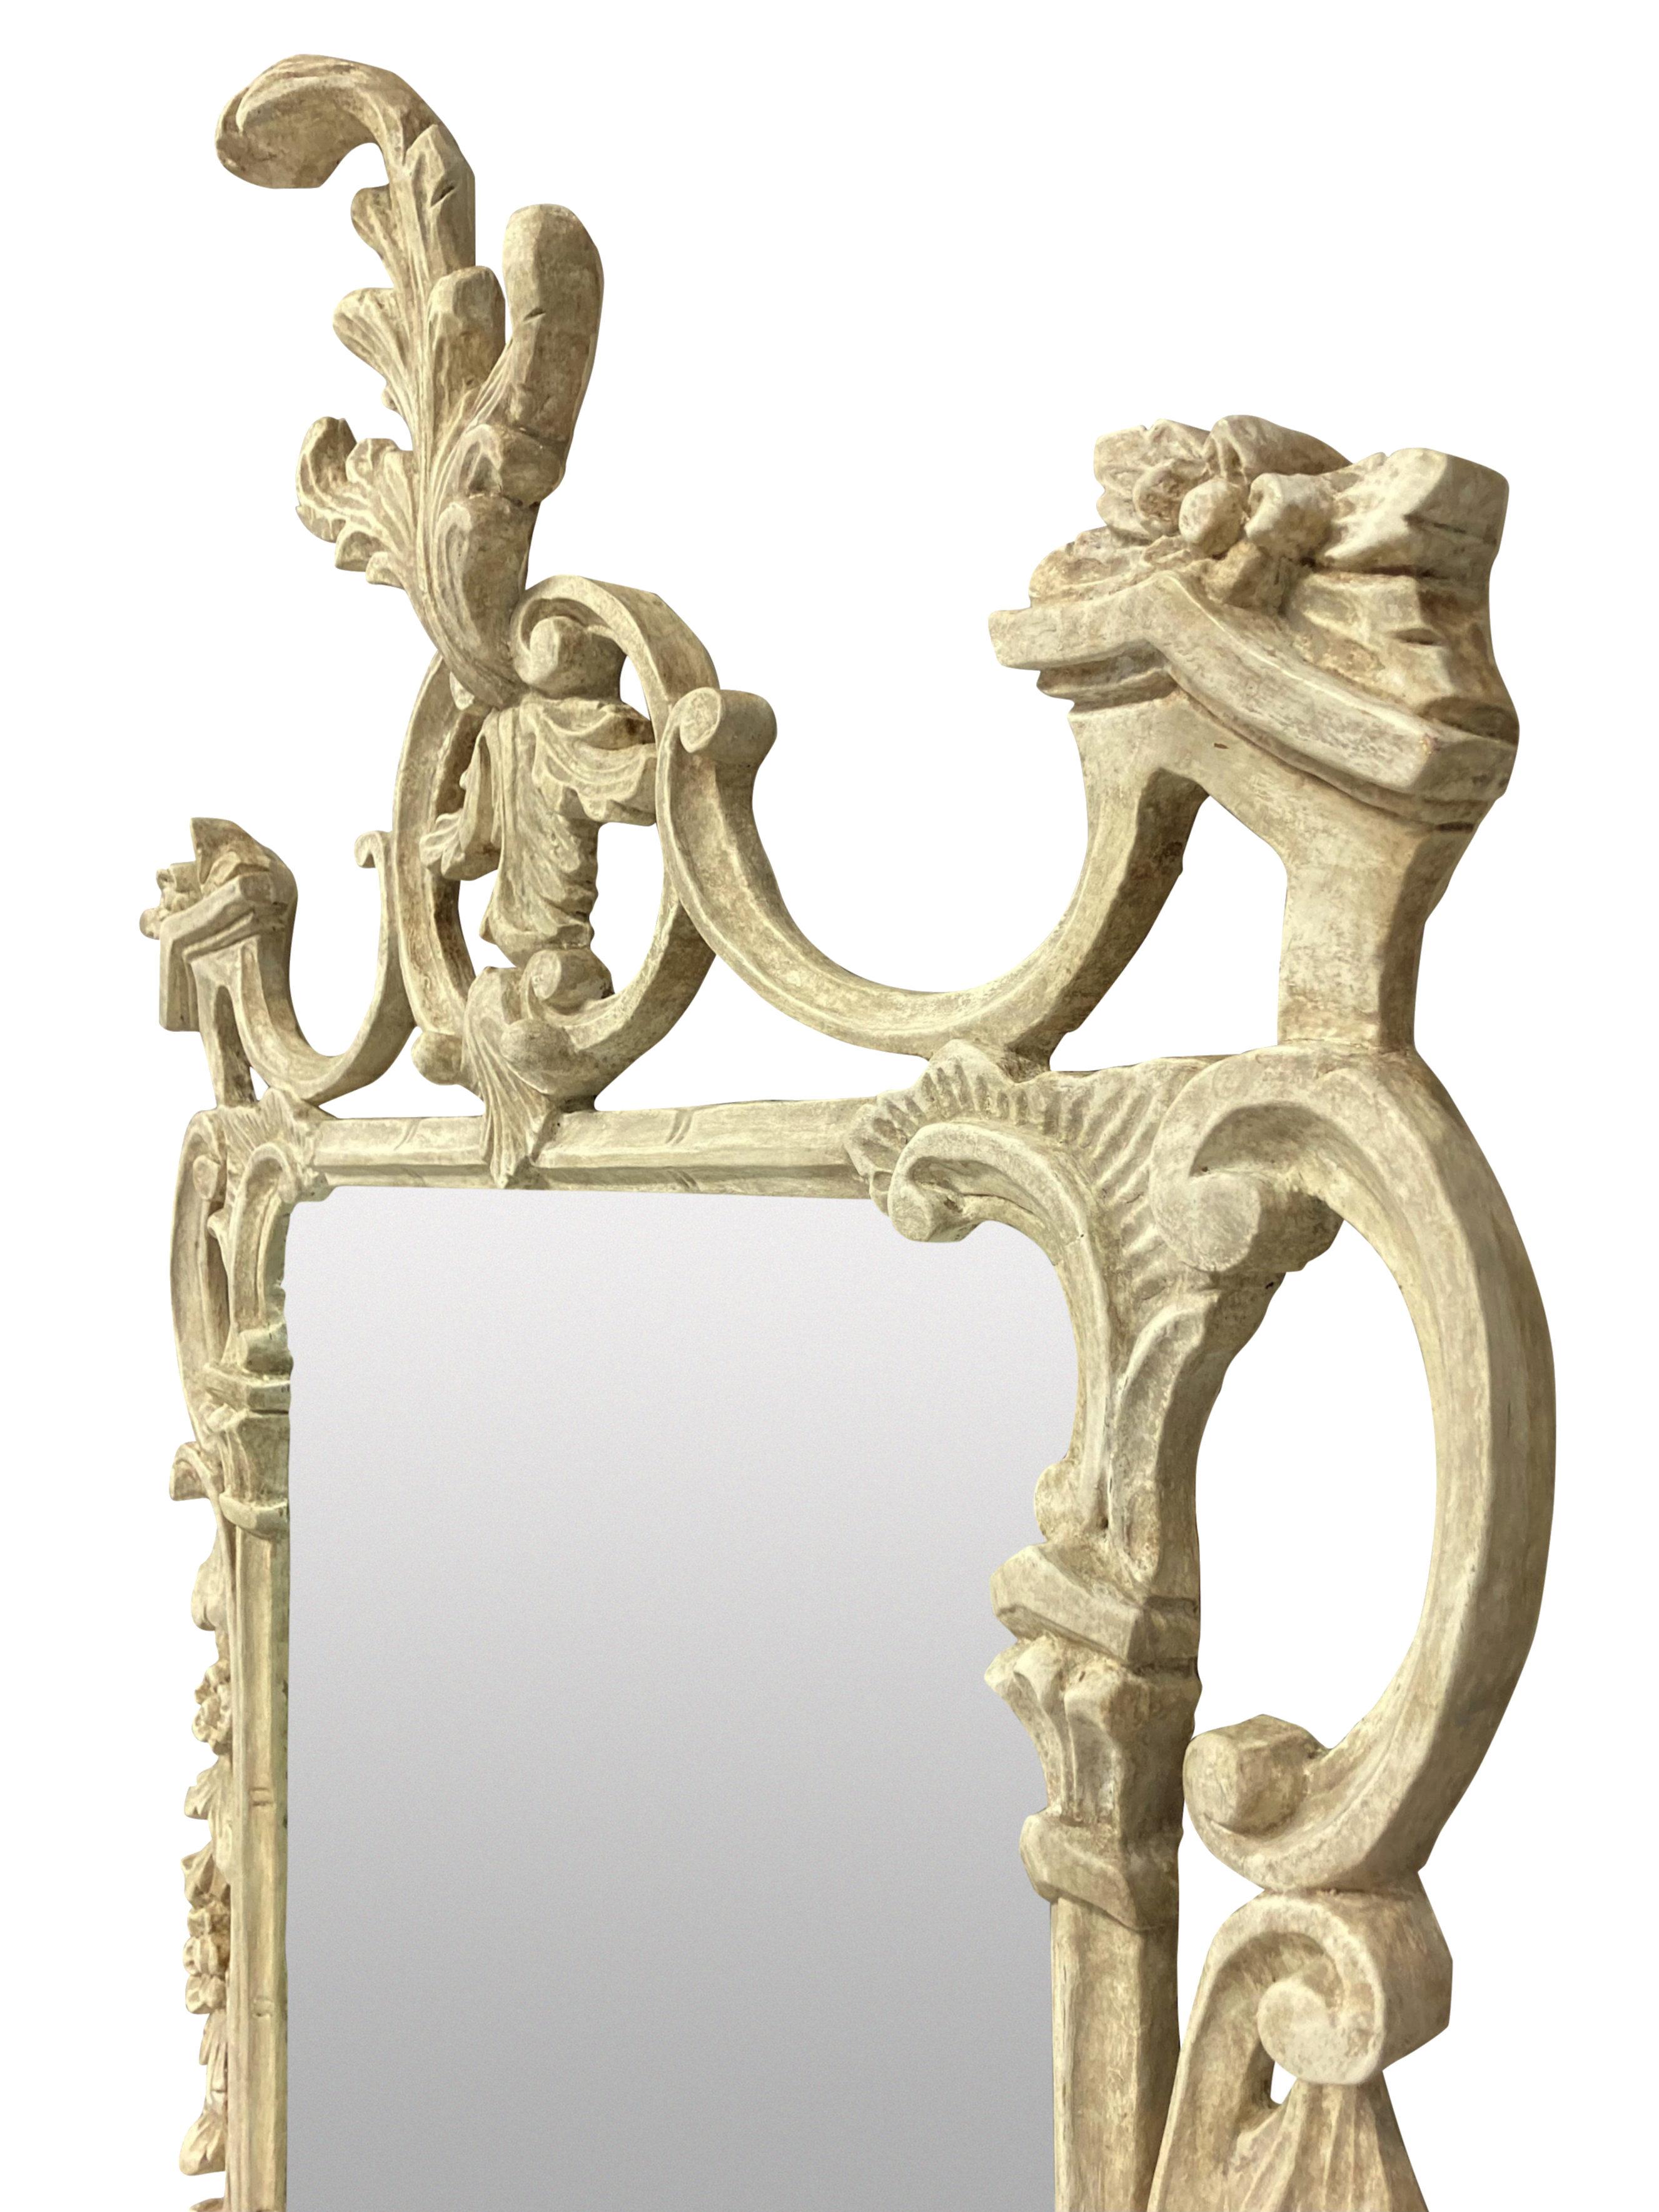 An English finely carved and painted Chippendale style mirror, in an ivory colour, with a later mirror plate.